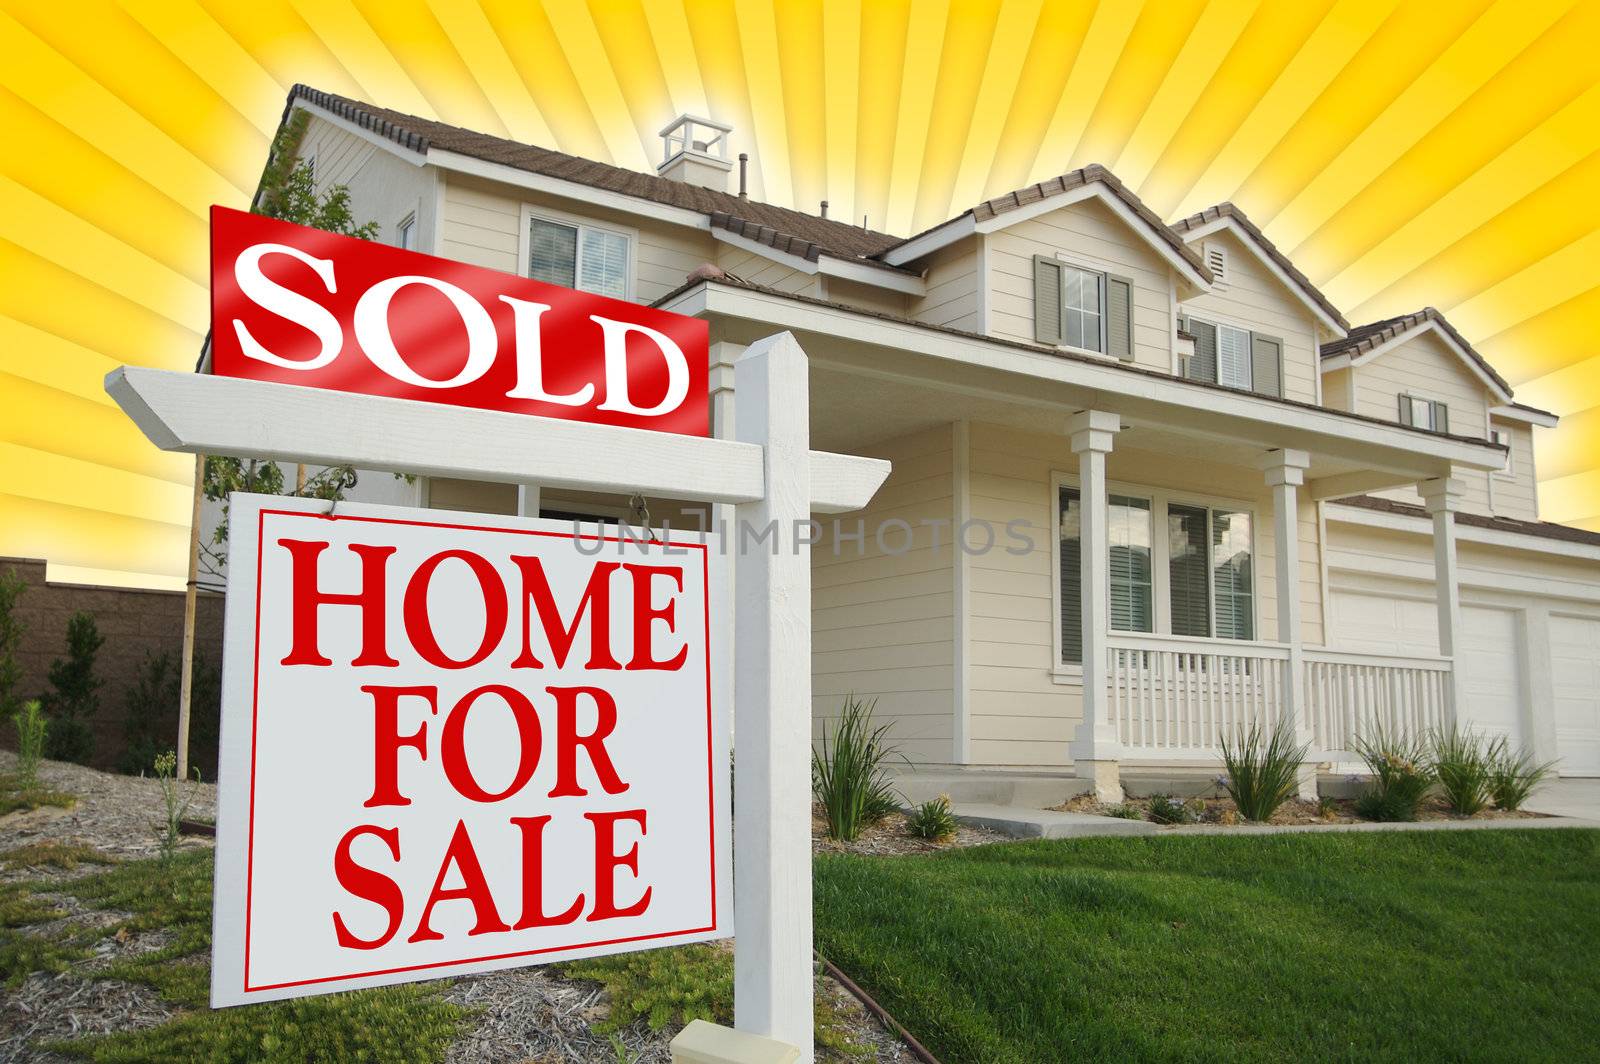 Sold Home For Sale Sign with Yellow Star-burst Background.